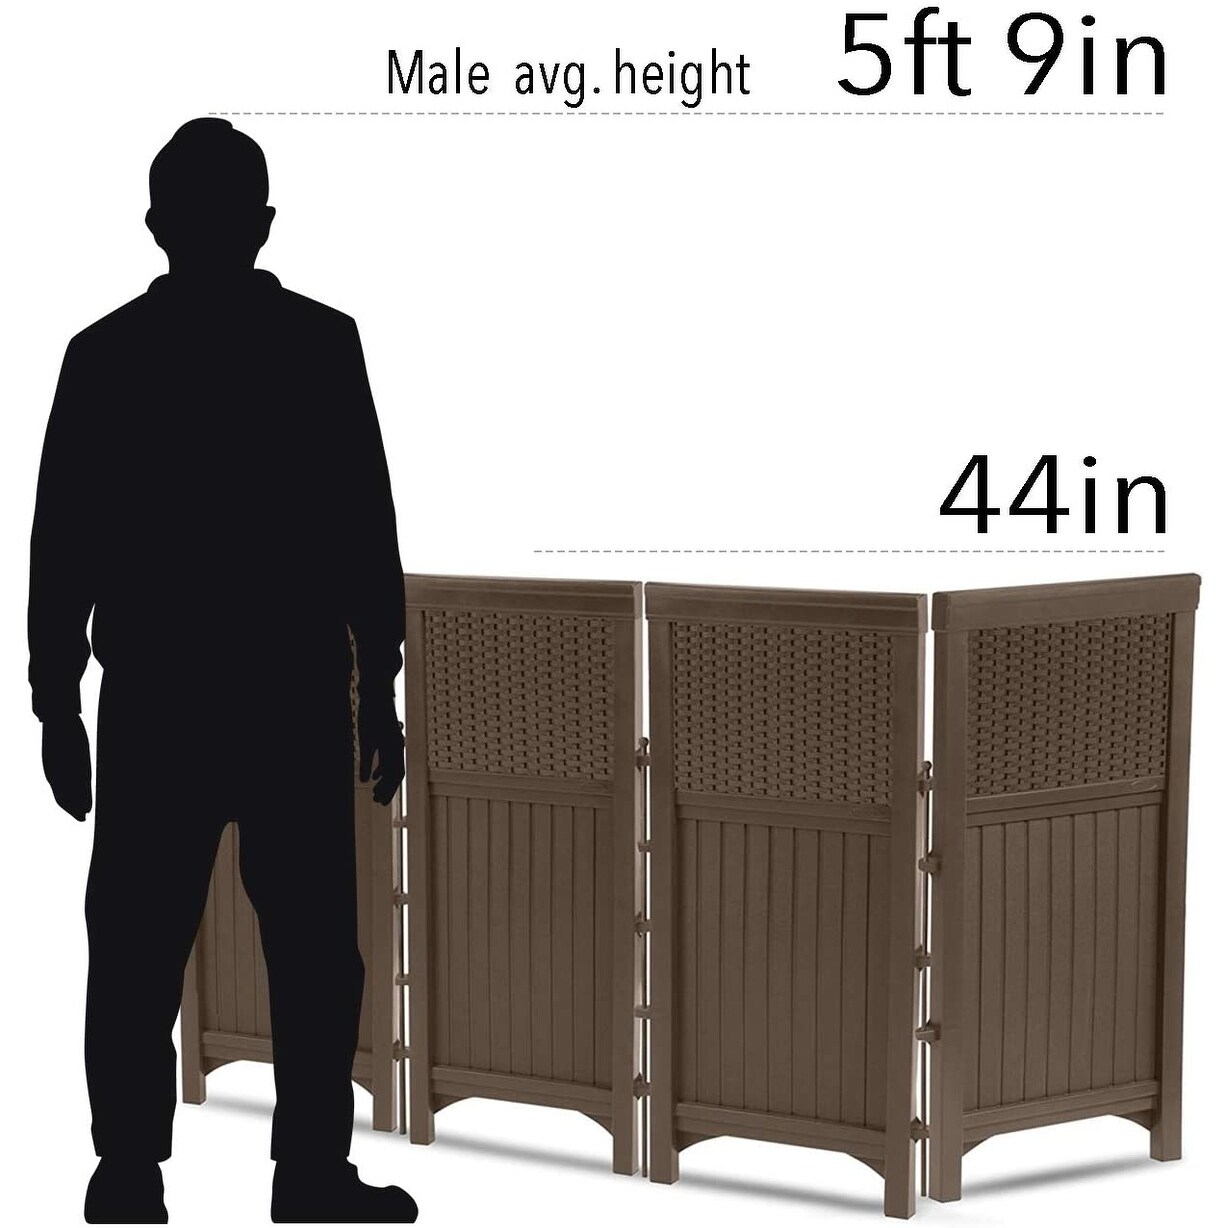 2 Pack Suncast FSW4423 Backyard and Patio Rust-Resistant Screen Fence Java 